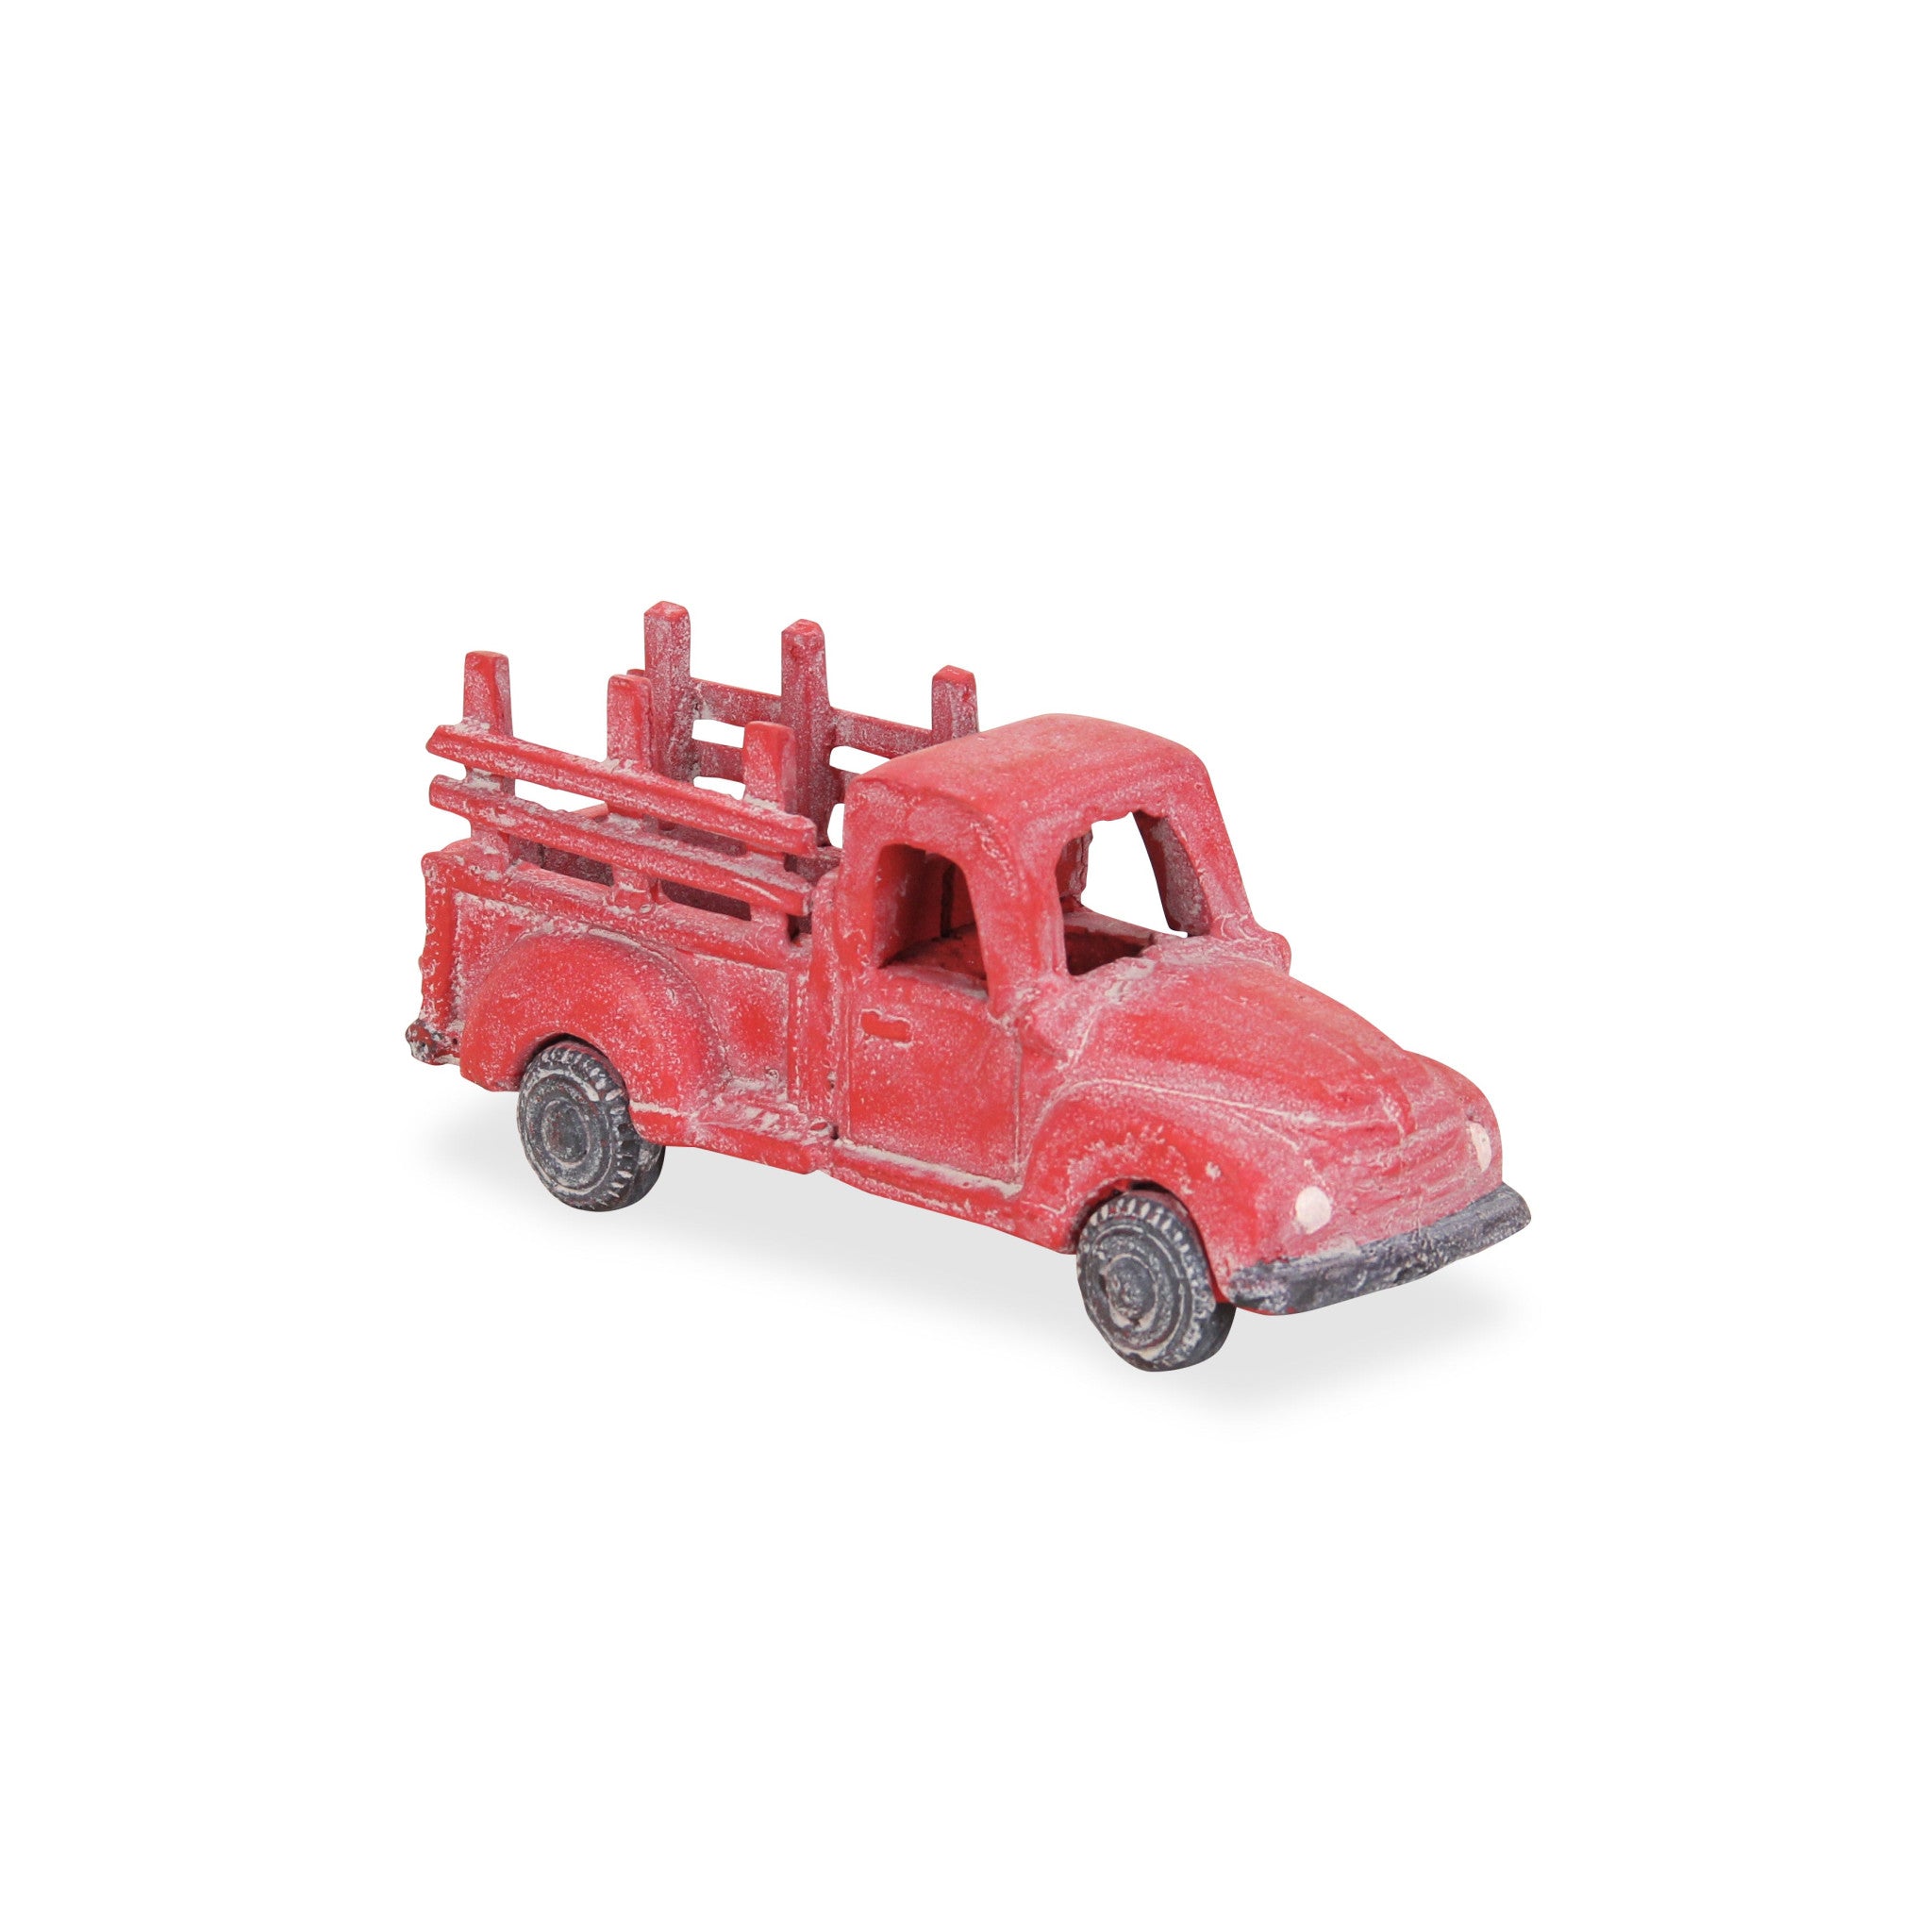 5" Red Metal Truck Hand Painted Decorative Truck